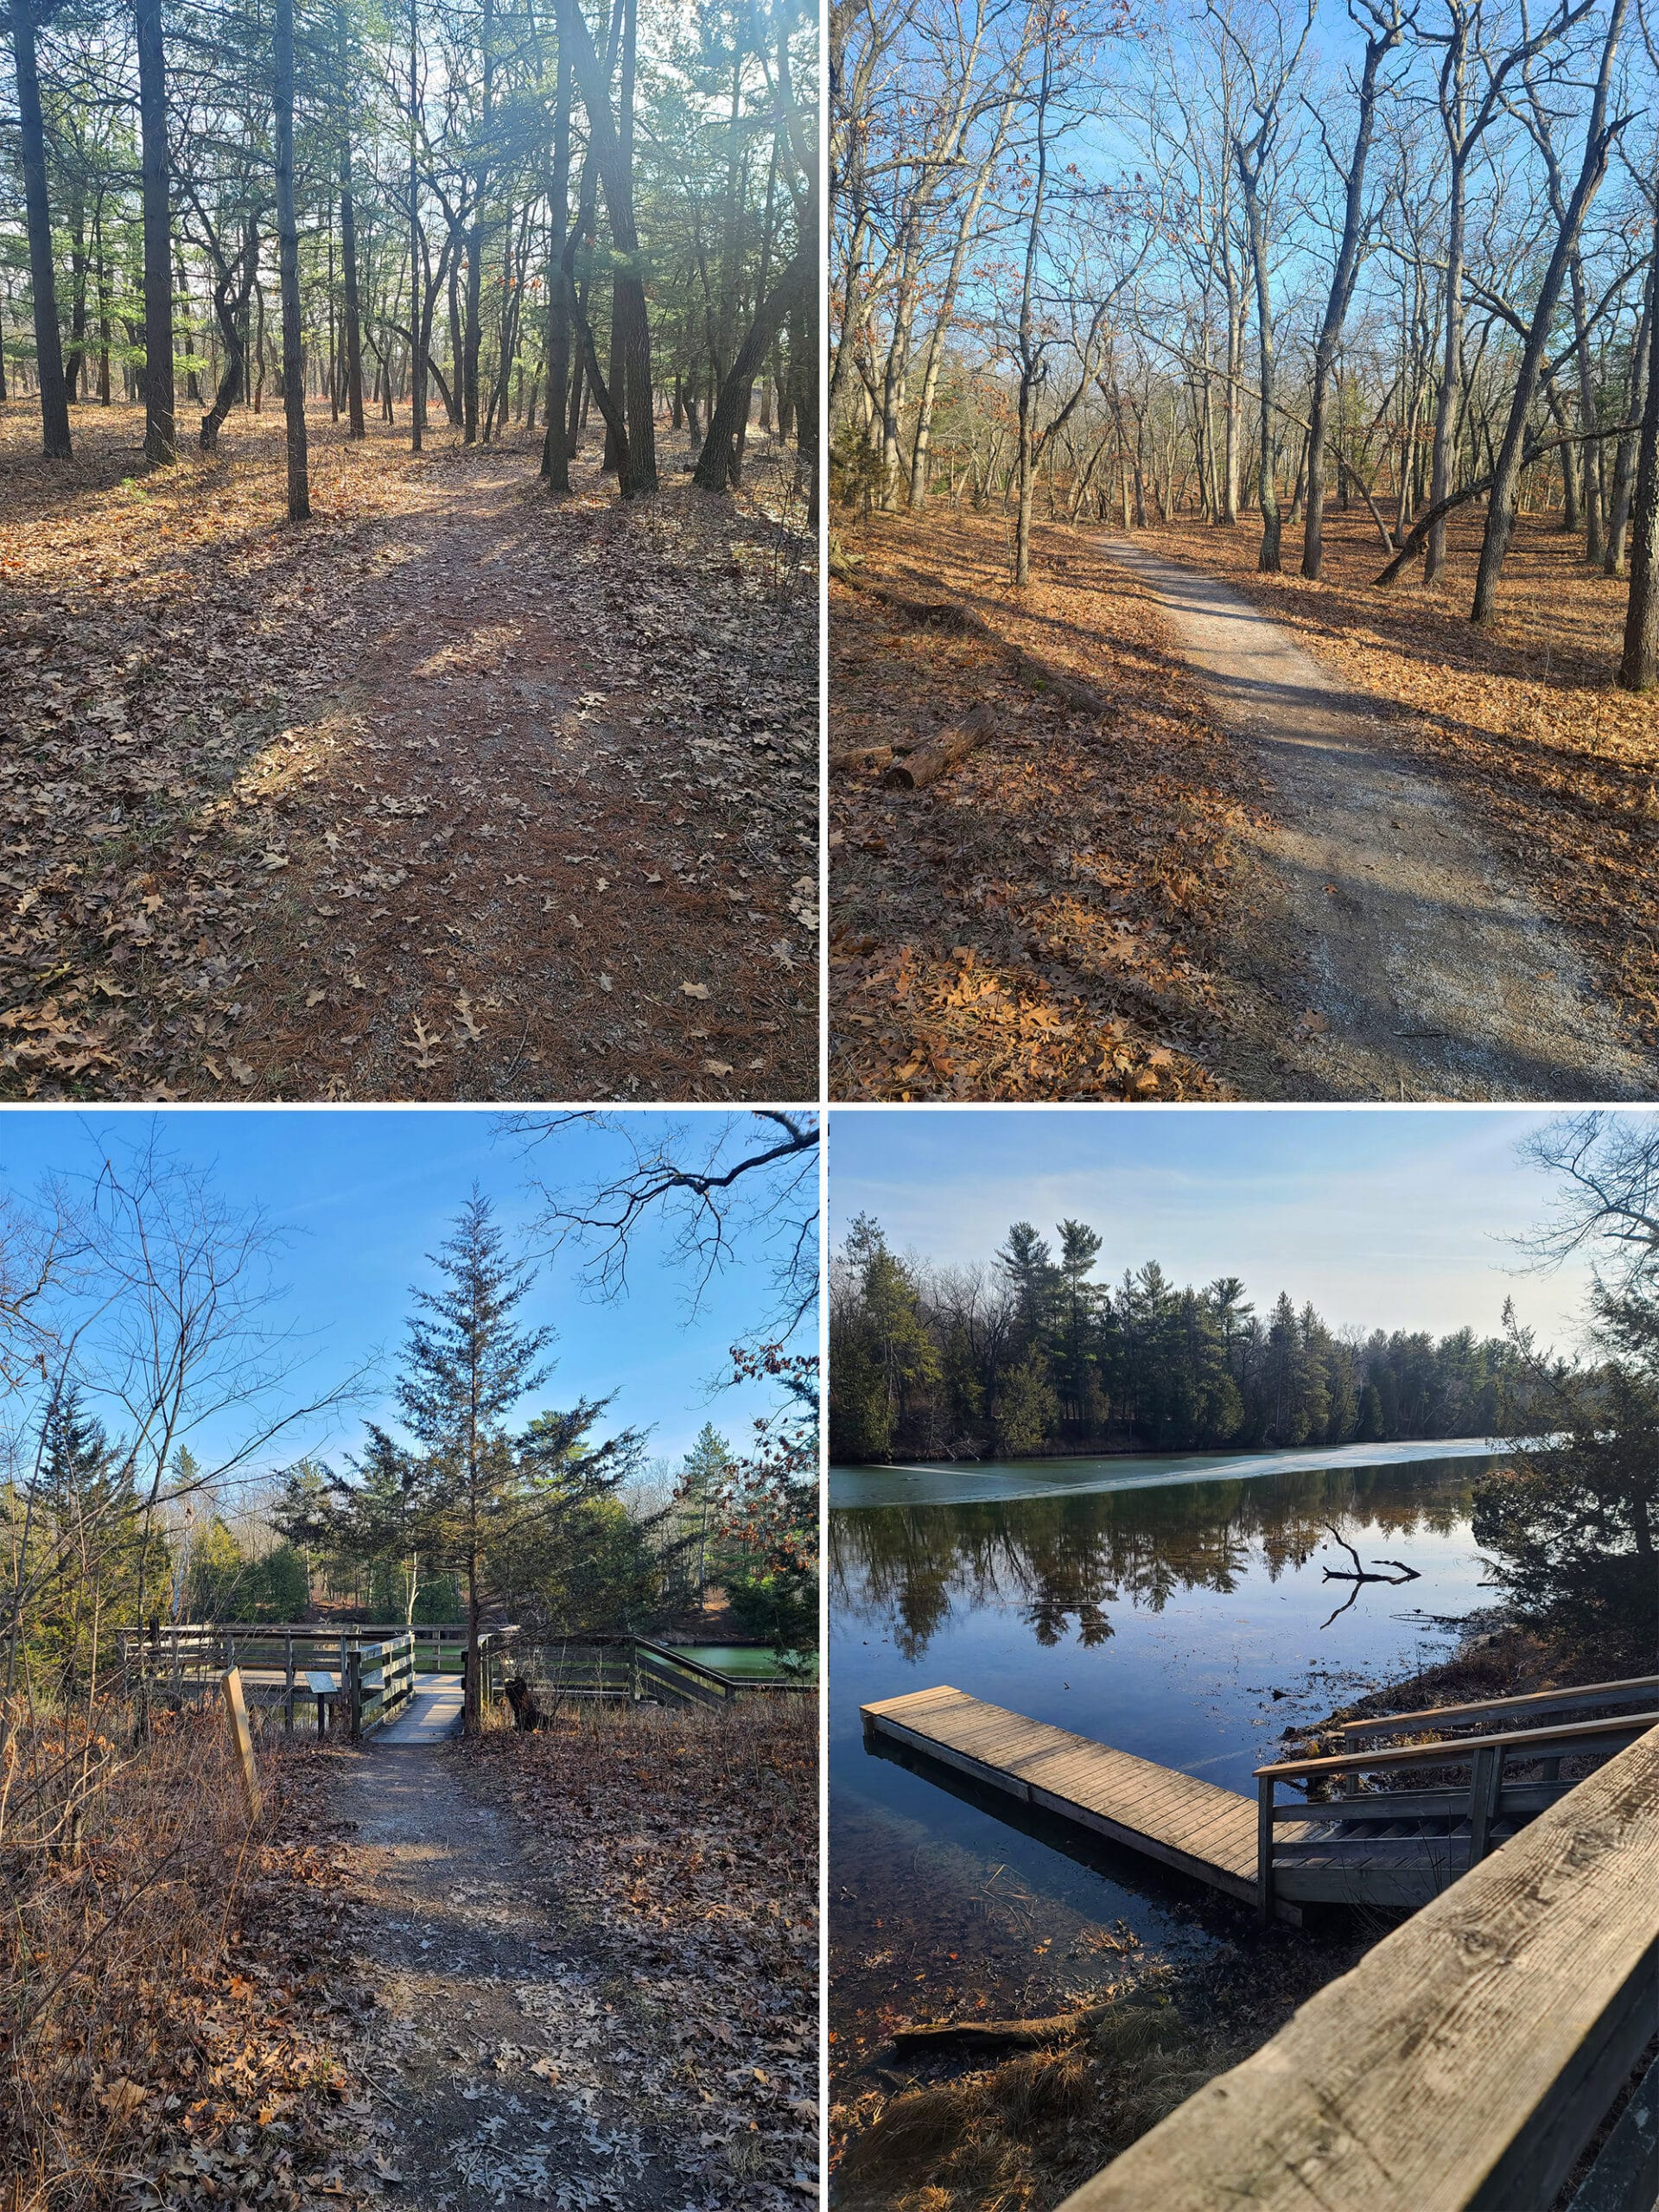 4 part image showing various views of hiking Heritage Trail.